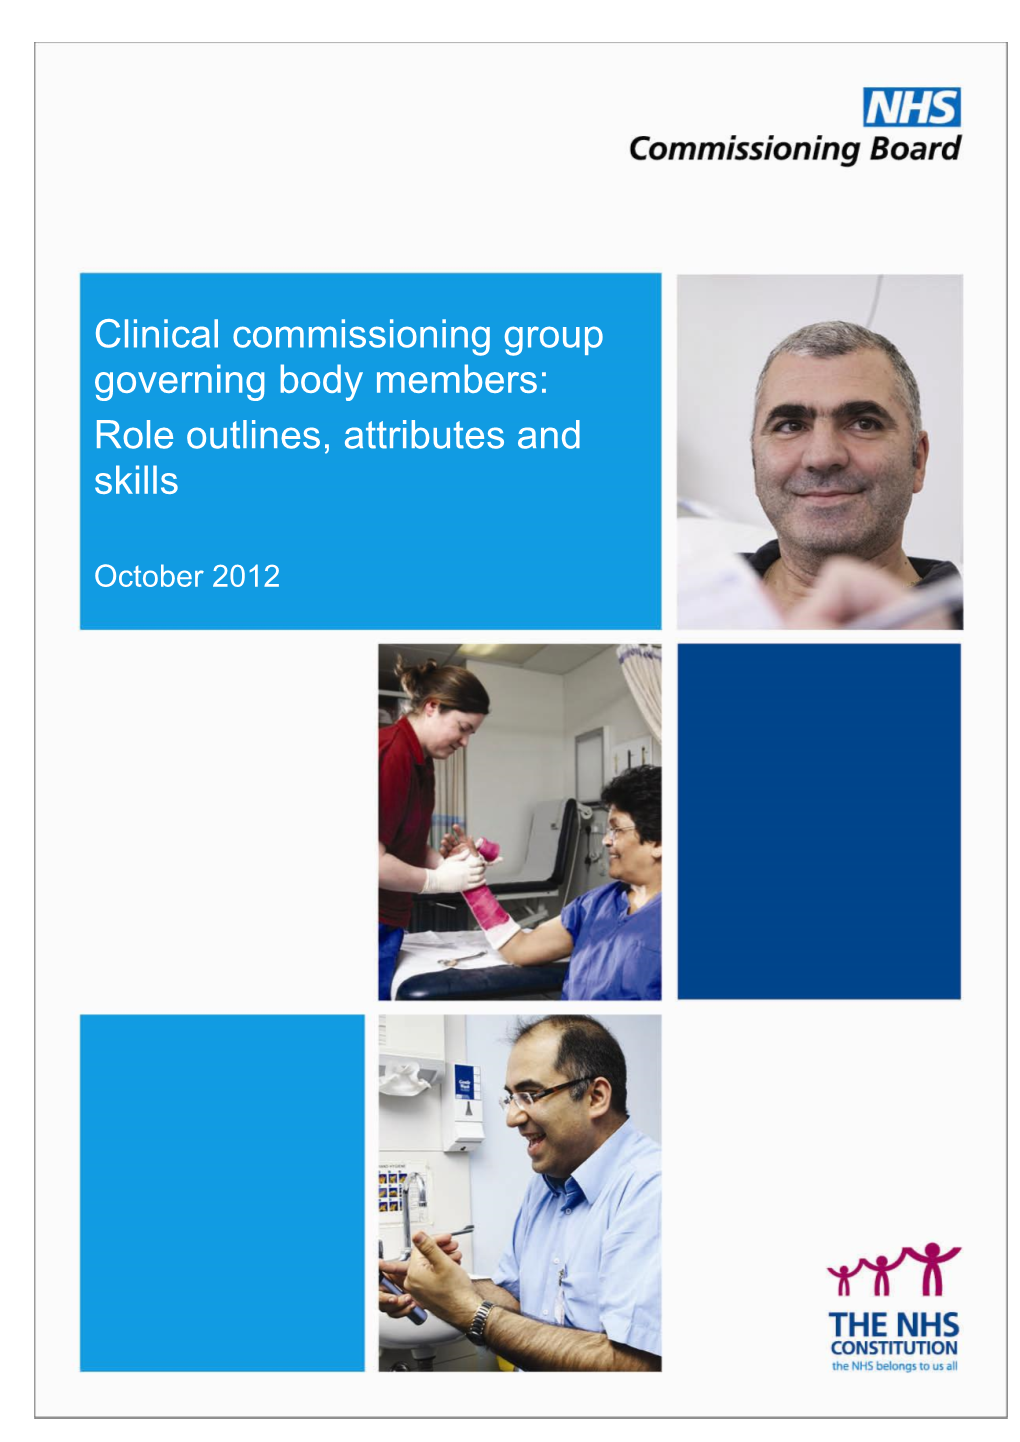 Clinical Commissioning Group Governing Body Members: Role Outlines, Attributes and Skills